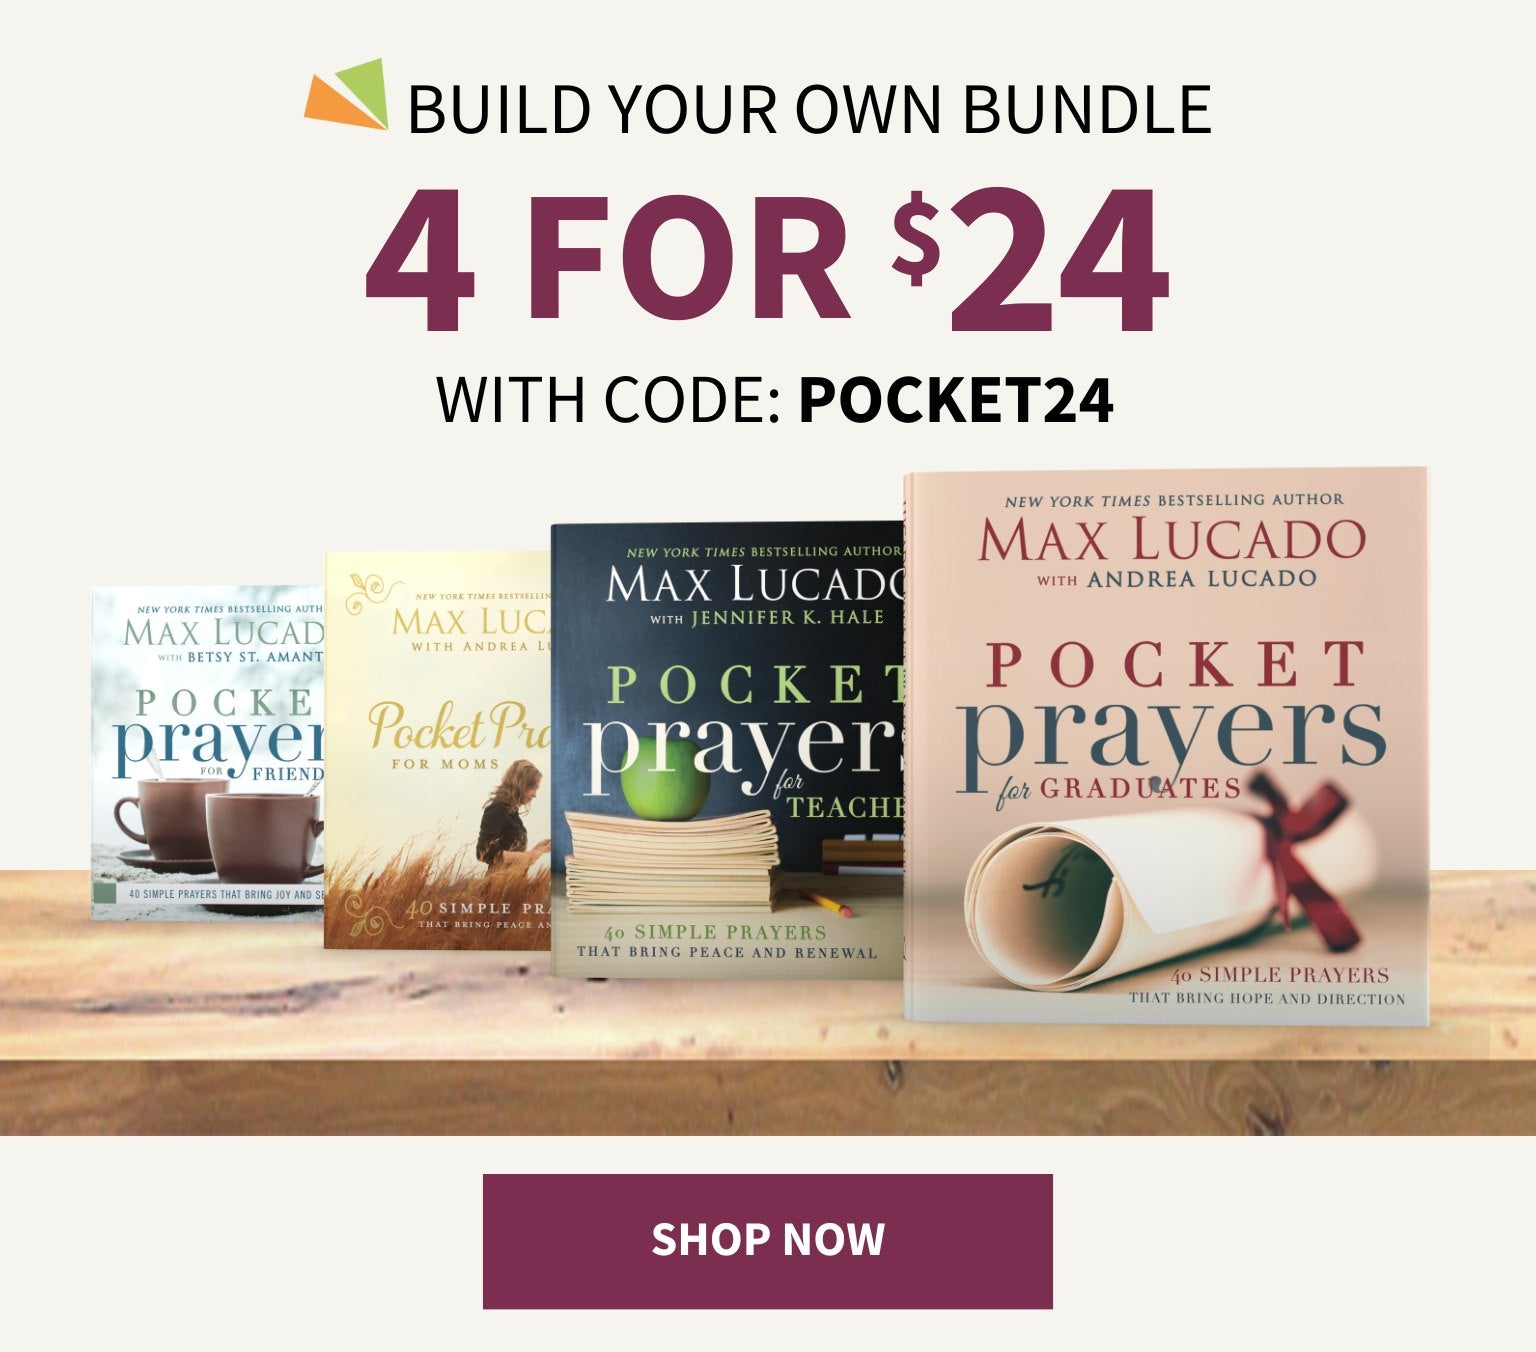 Build Your Own Bundle 4 for $24 with code: Pocket24